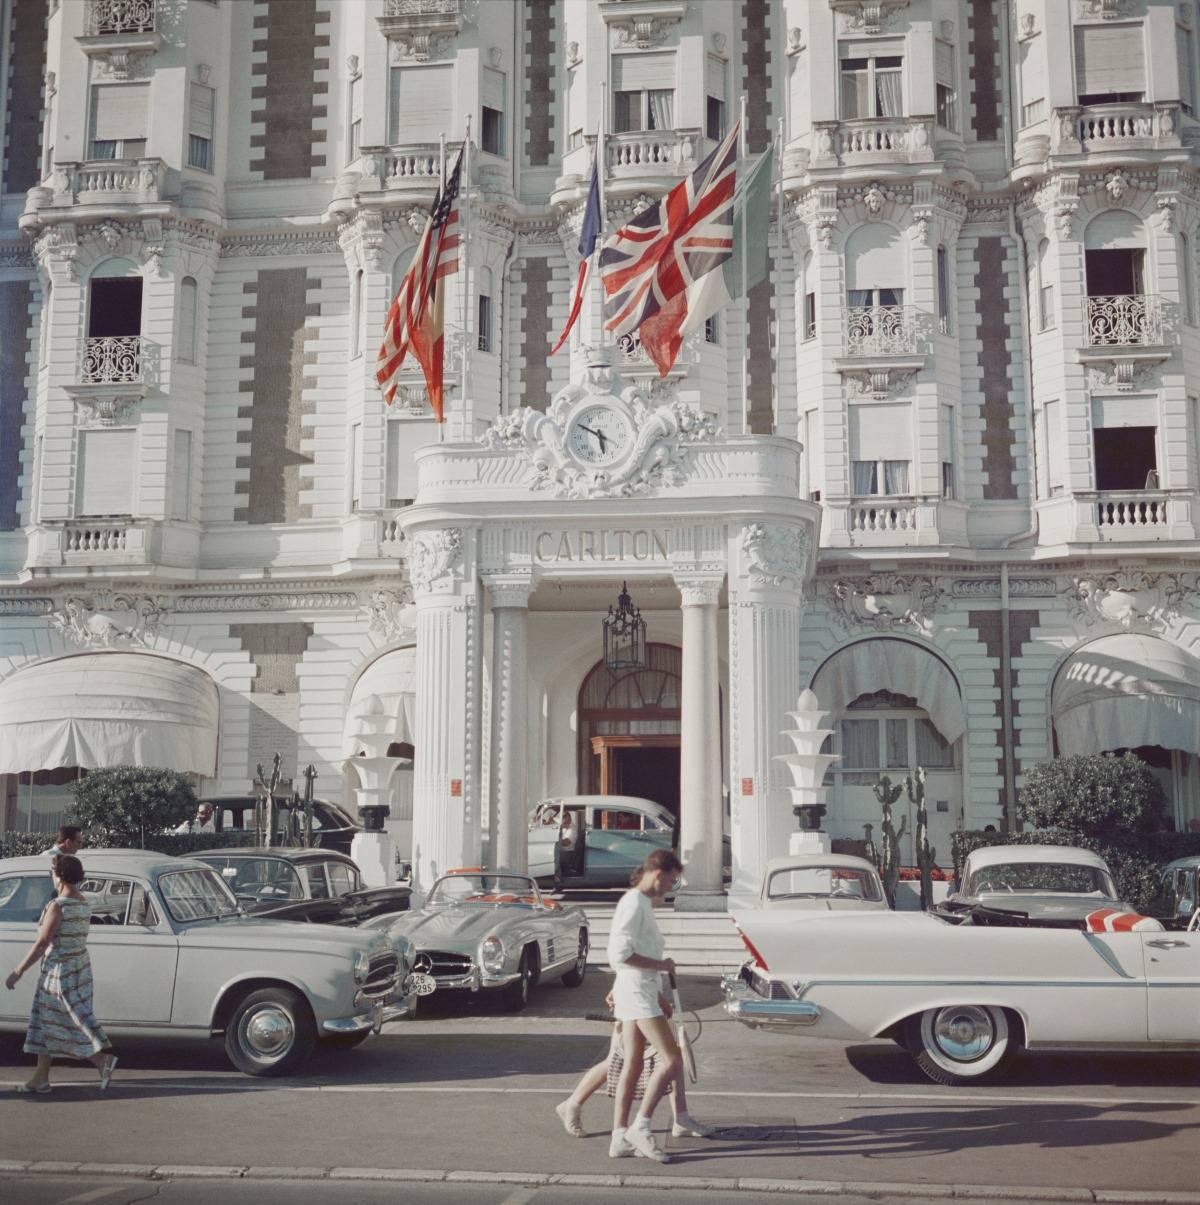 Carlton Hotel
1958
C print
Estate stamped and hand numbered edition of 150 with certificate of authenticity from the estate. 

The entrance to the Carlton Hotel, Cannes, France, 1958. 

Slim Aarons (1916-2006) worked mainly for society publications